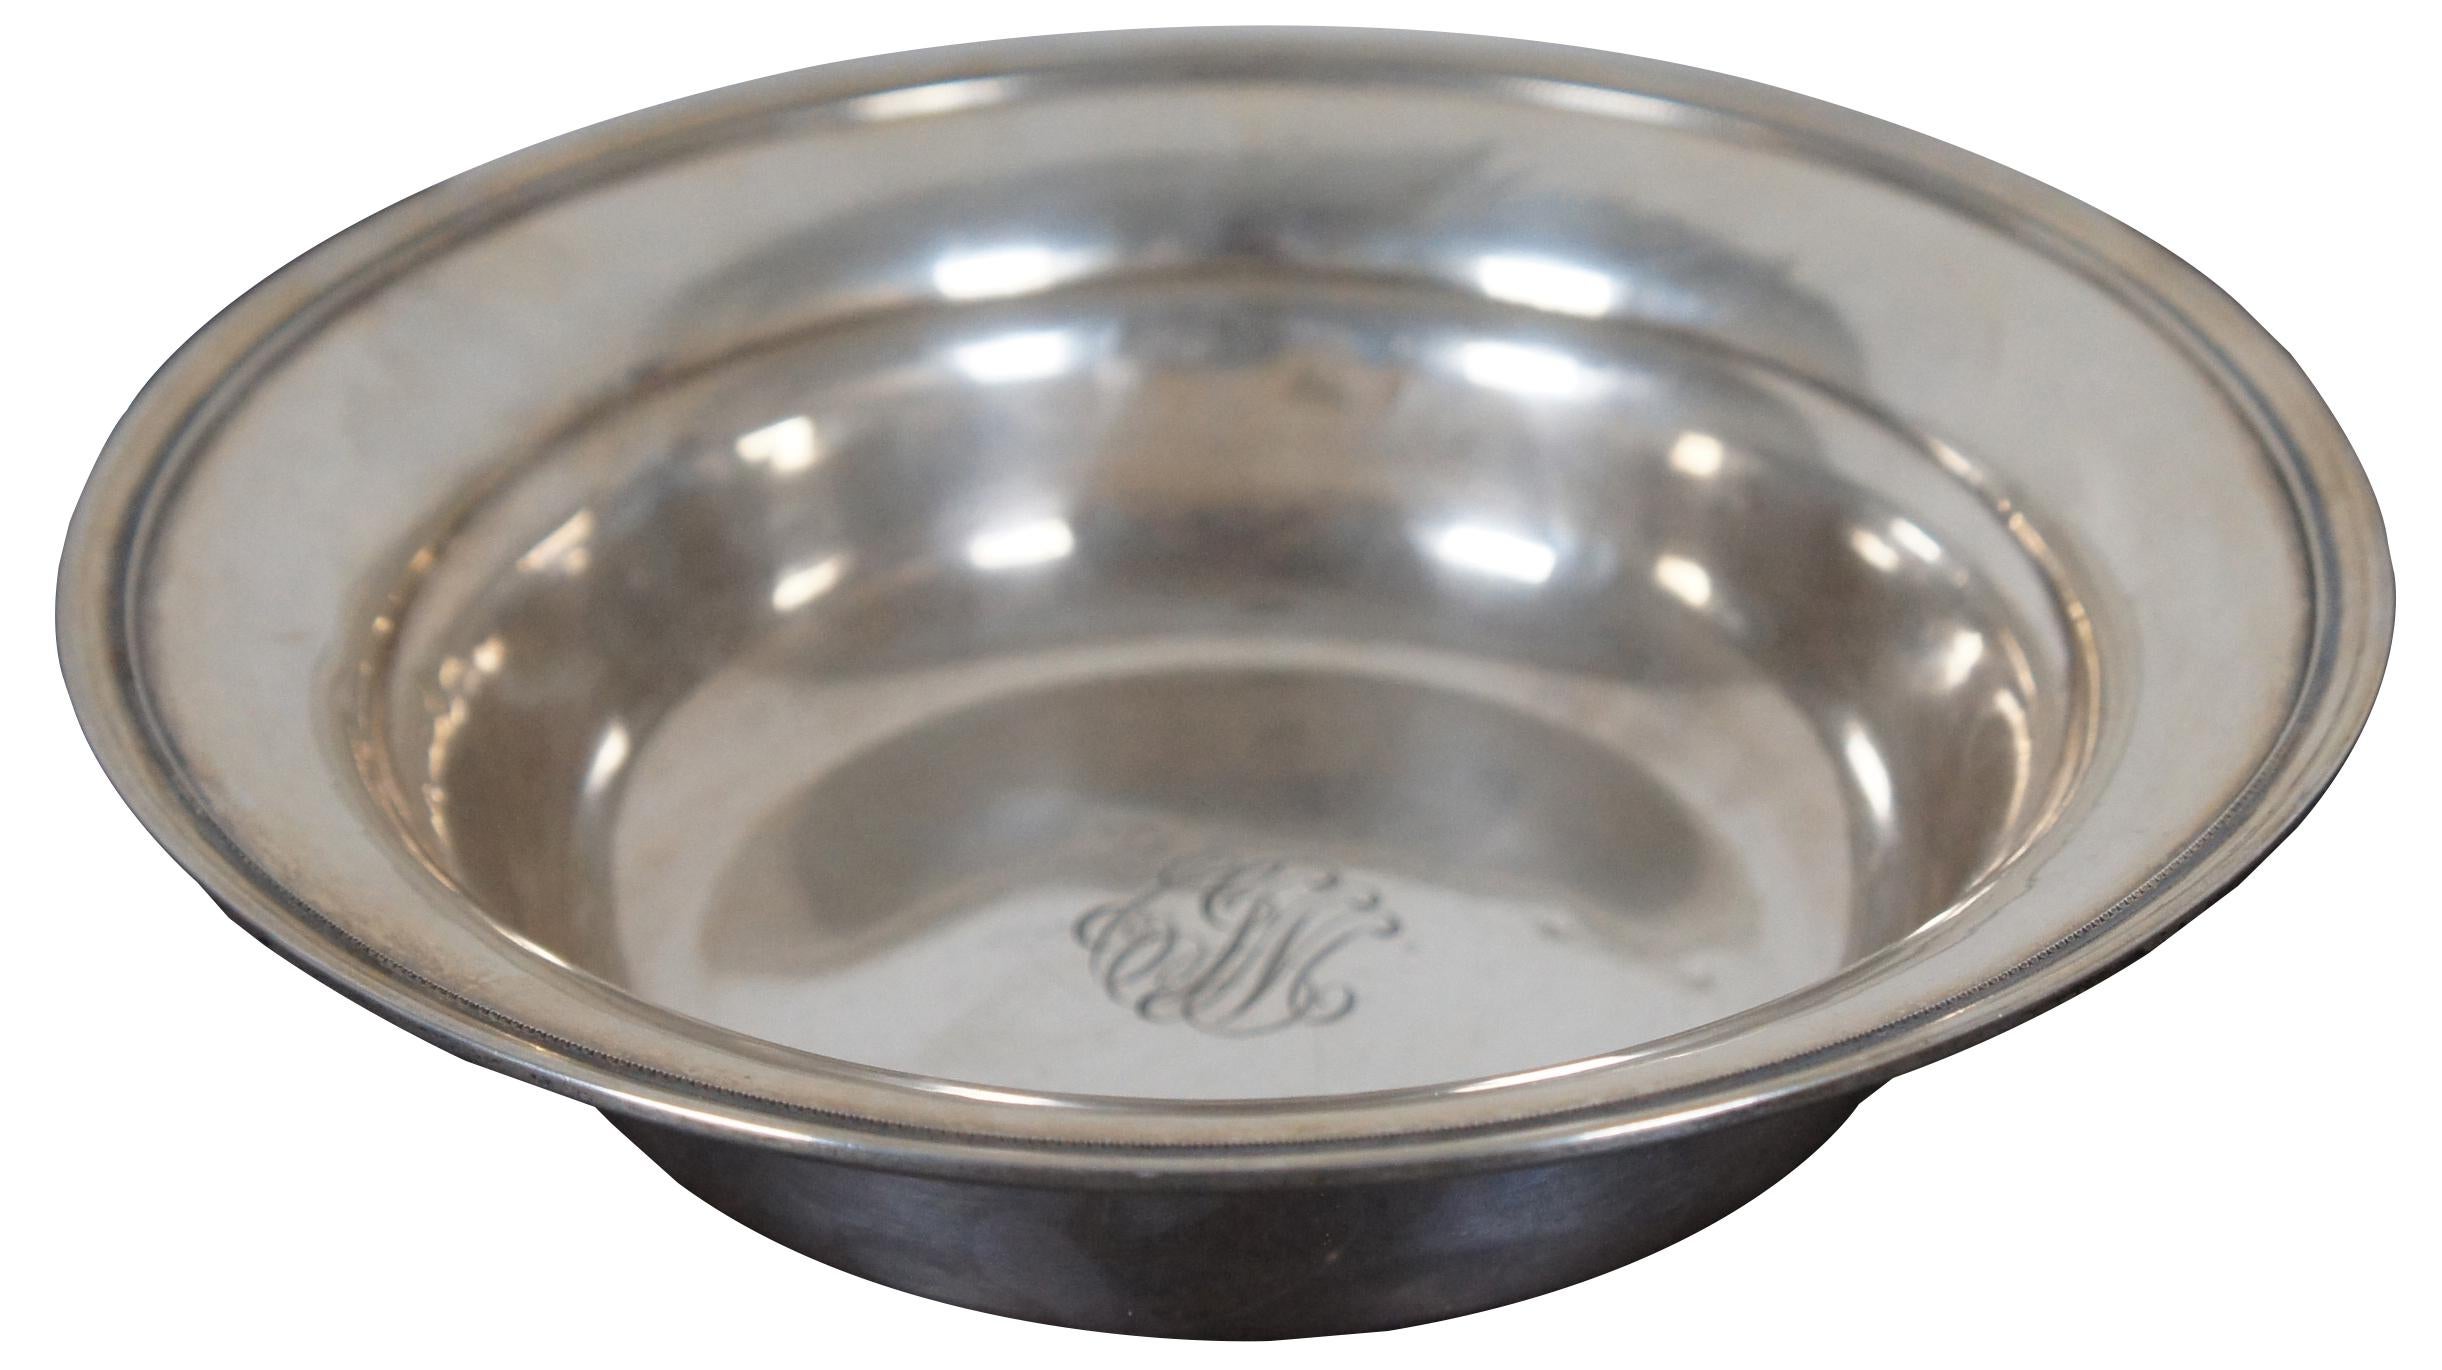 Antique S. Kirk & Son sterling silver serving bowl with monogram at the center. Marked S. Kirk & Son Co., 925 / 1000 , 3700.
    